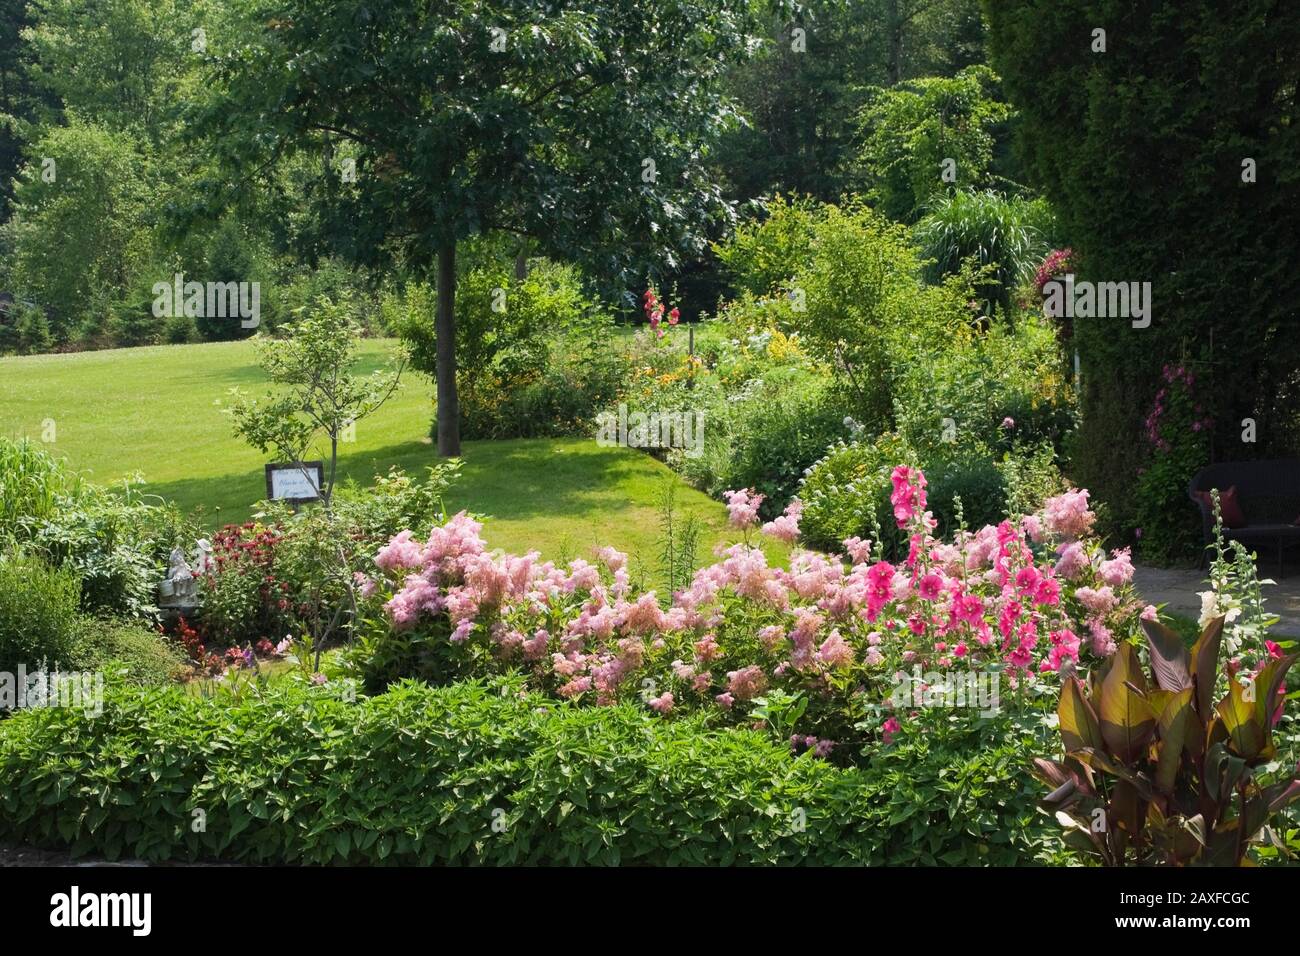 English border with Canna - Indian Shot, pink Filipendula 'Queen of the Prairie' and pink Alcea rosea - Hollyhock flowers in private backyard garden. Stock Photo